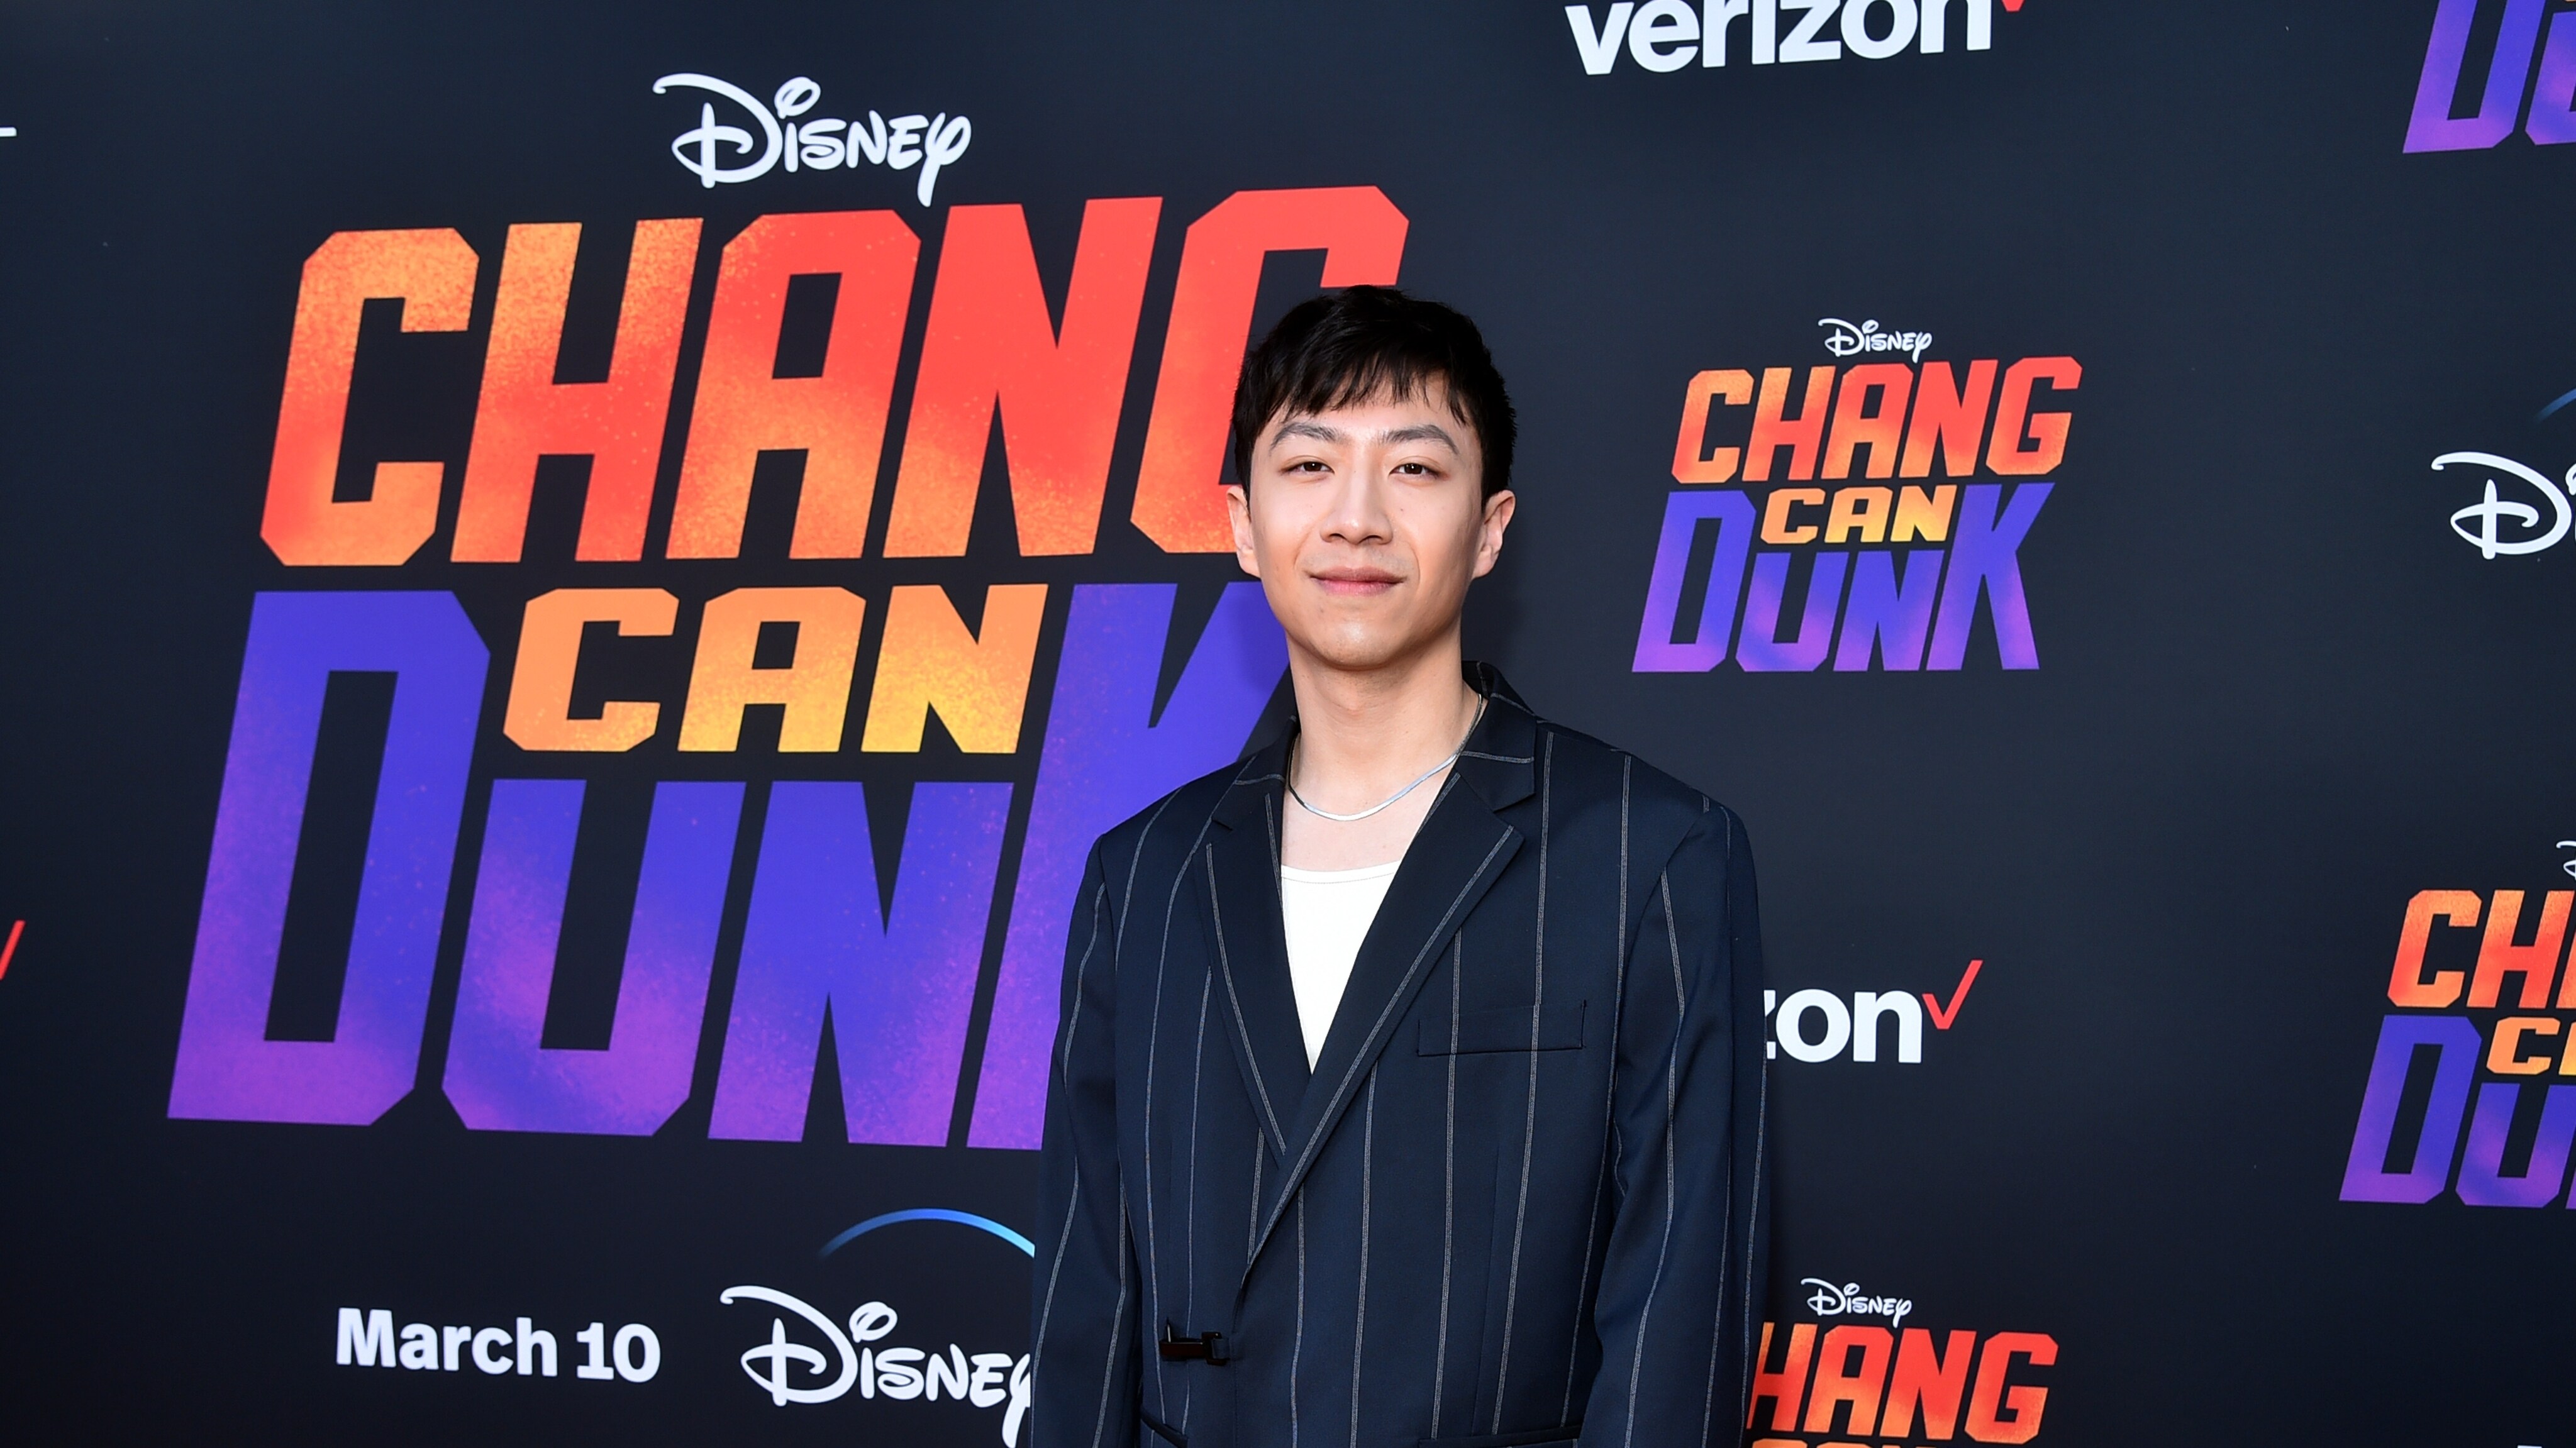 Stills And B-Roll From Launch & Screening Event For Disney’s “Chang Can Dunk” Available Now